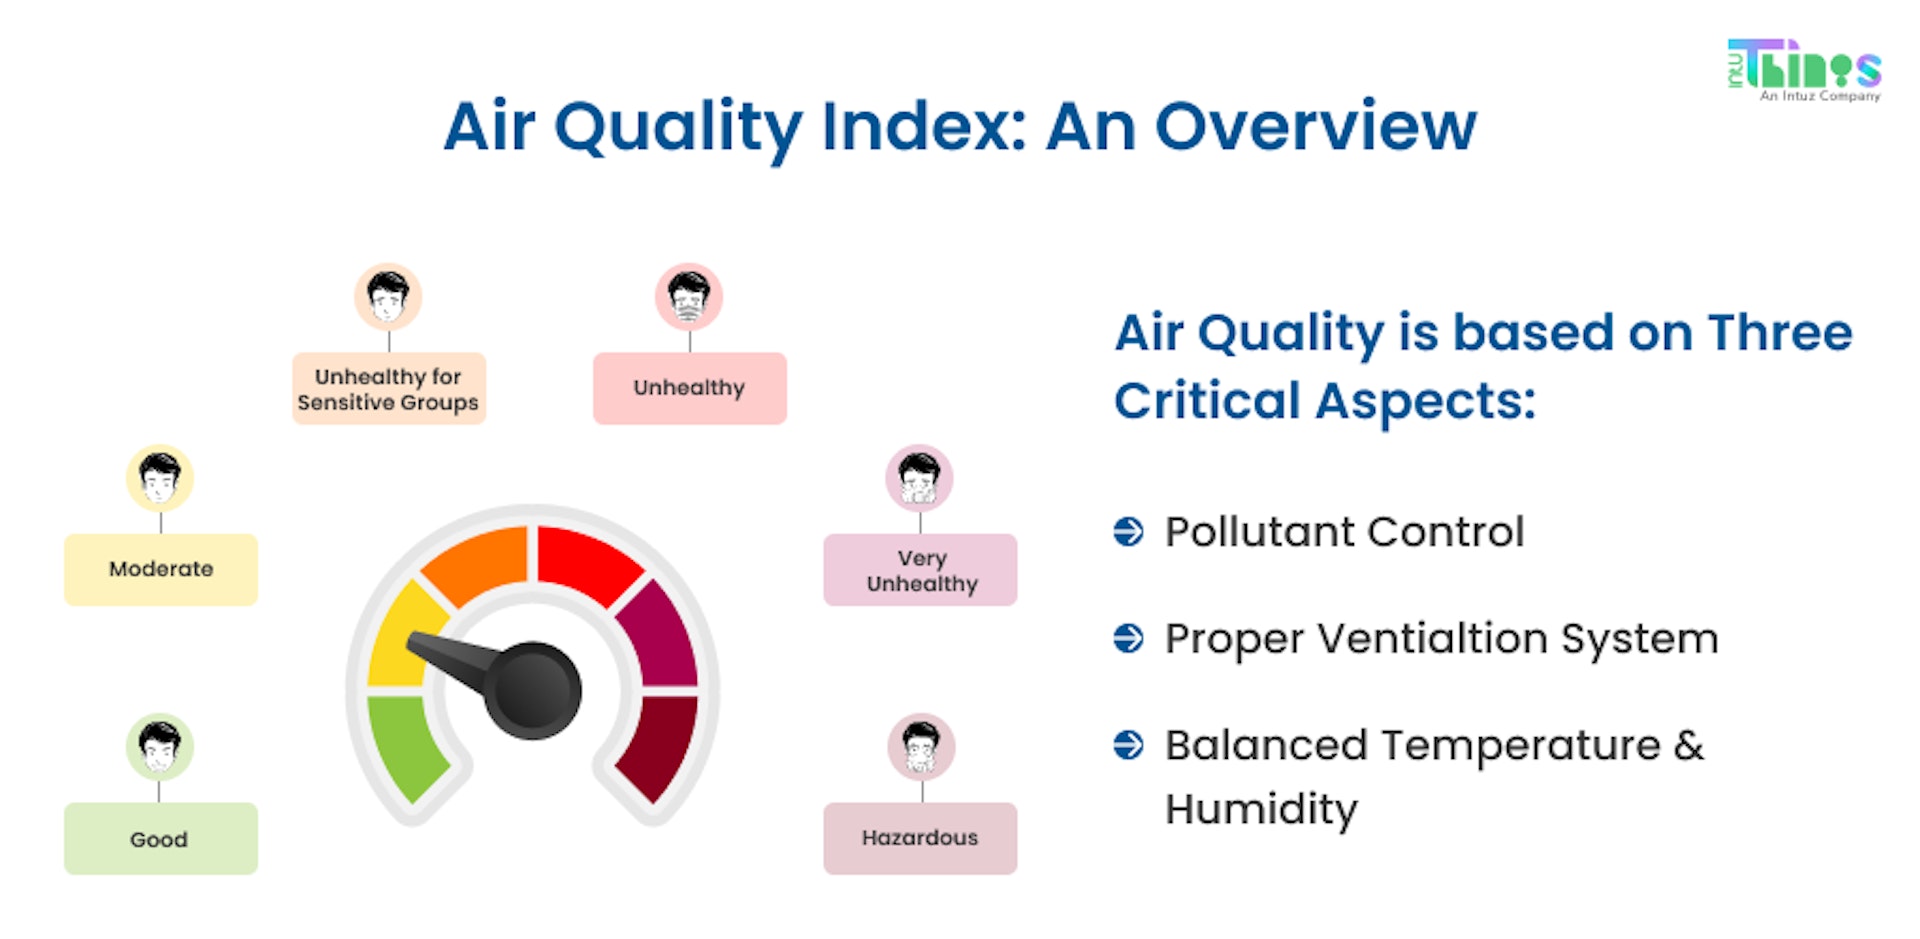 Air Quality Index: An Overview